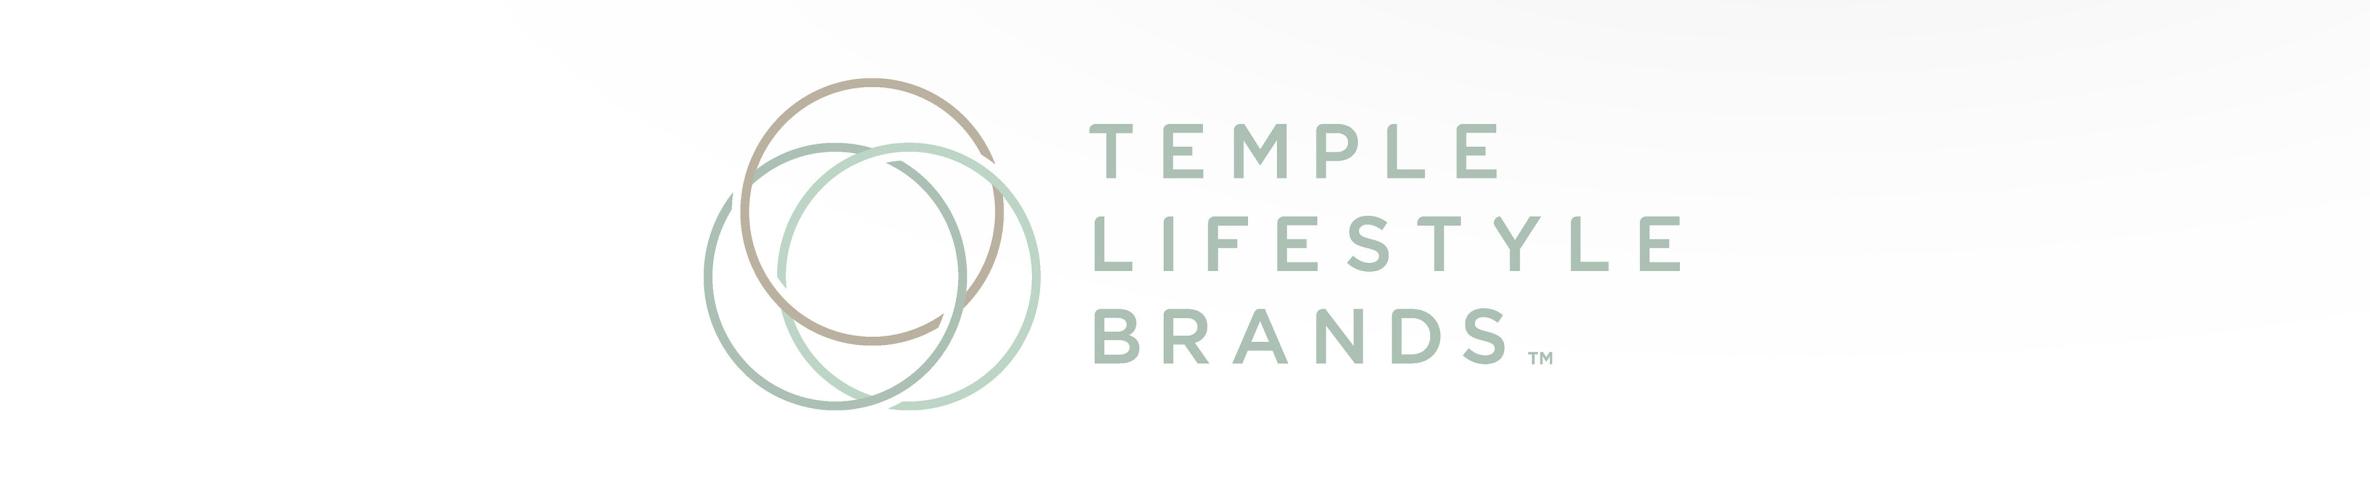 Temple Lifestyle Brands resize.png